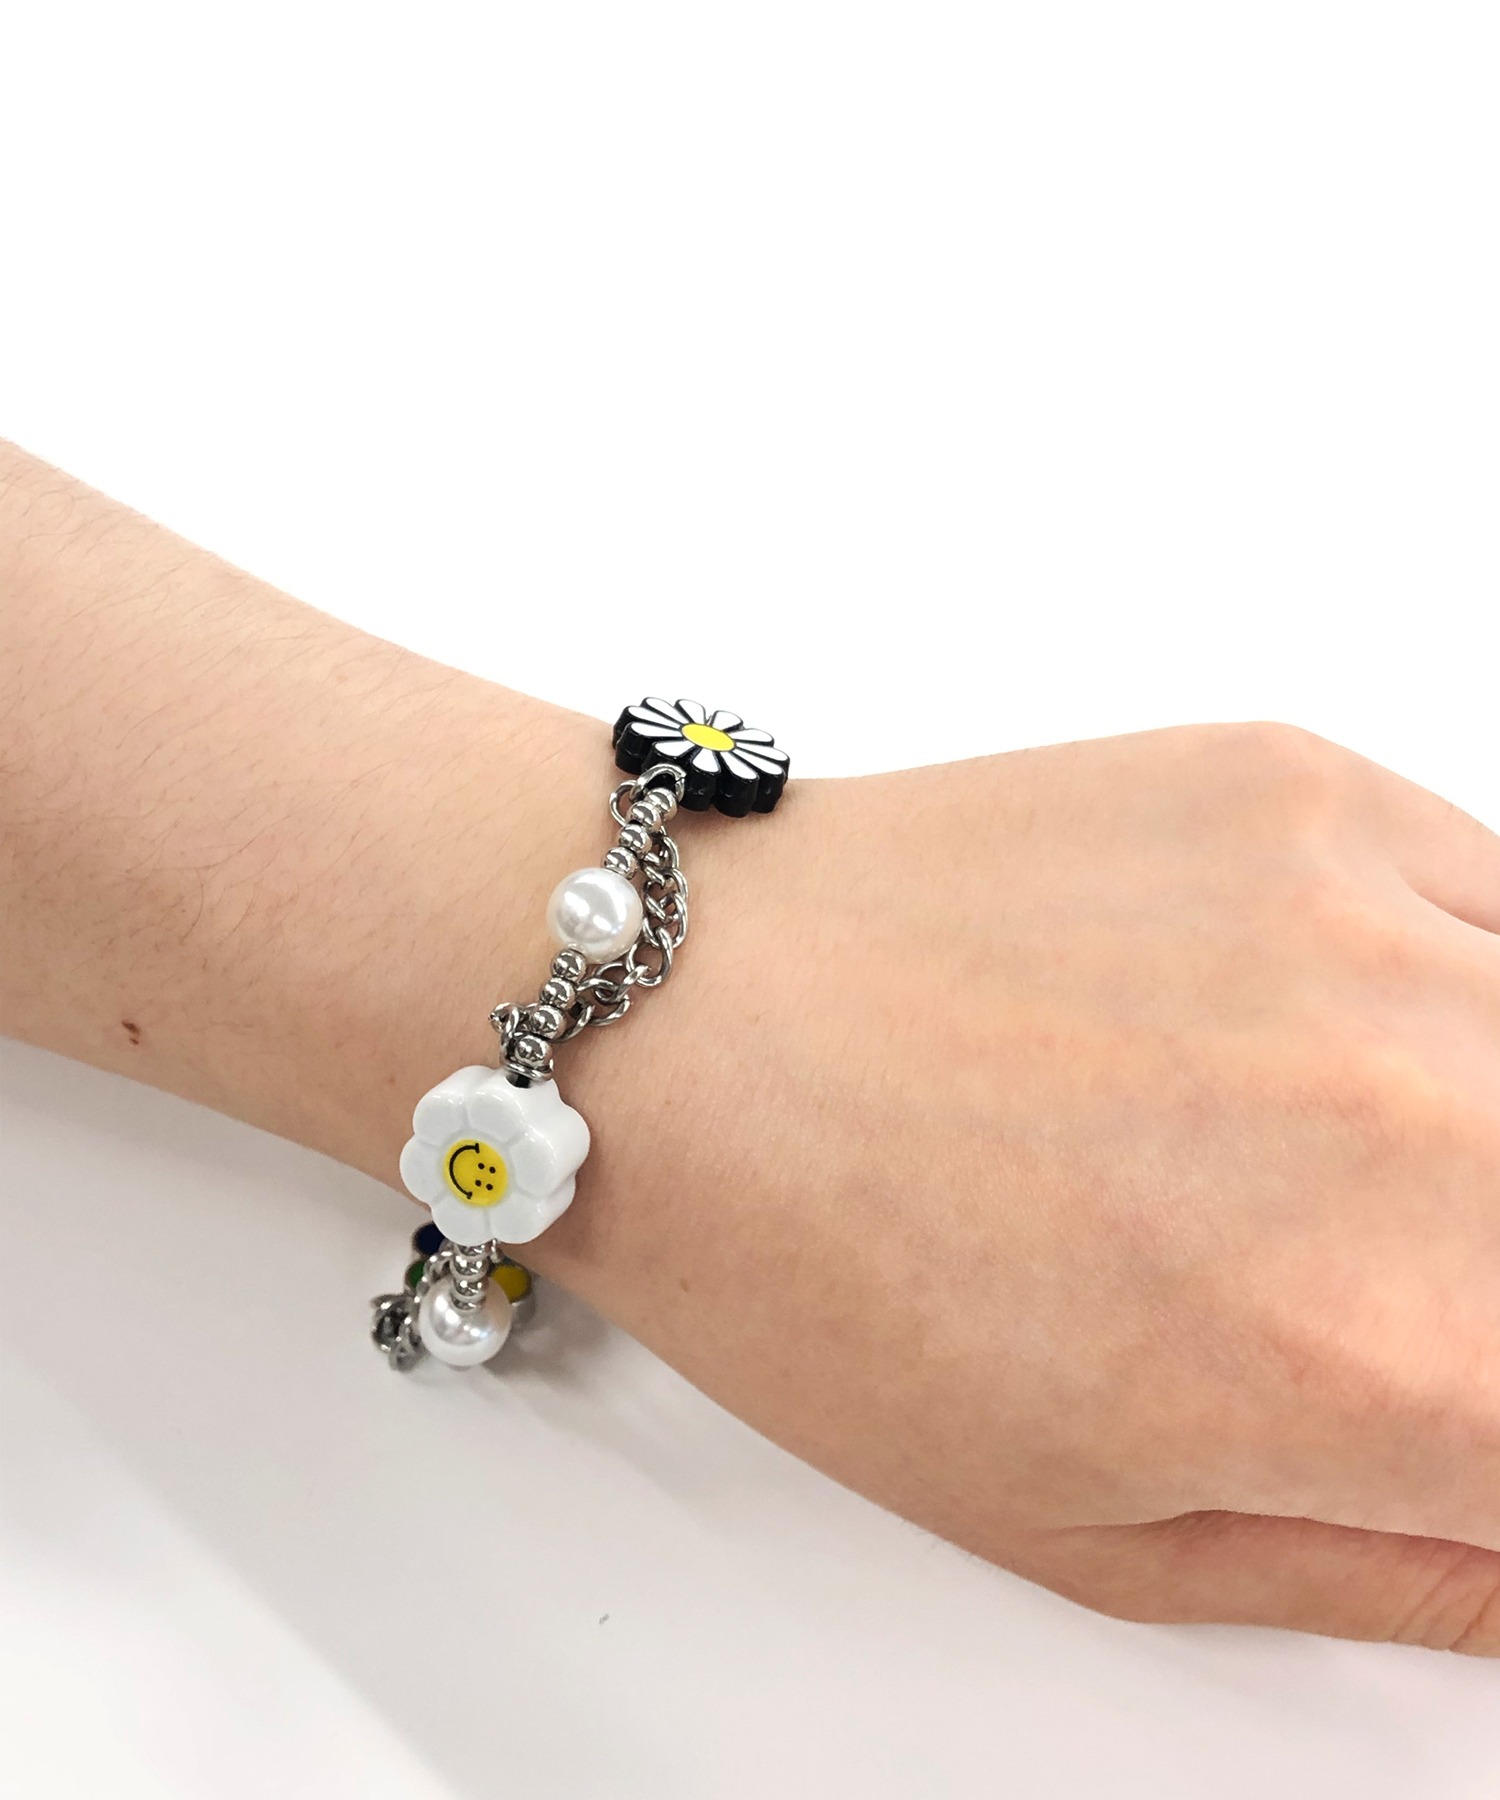 SALUTE/サルーテ』 FLOWER ANARCHY PEARL CHARMS BRACELET by